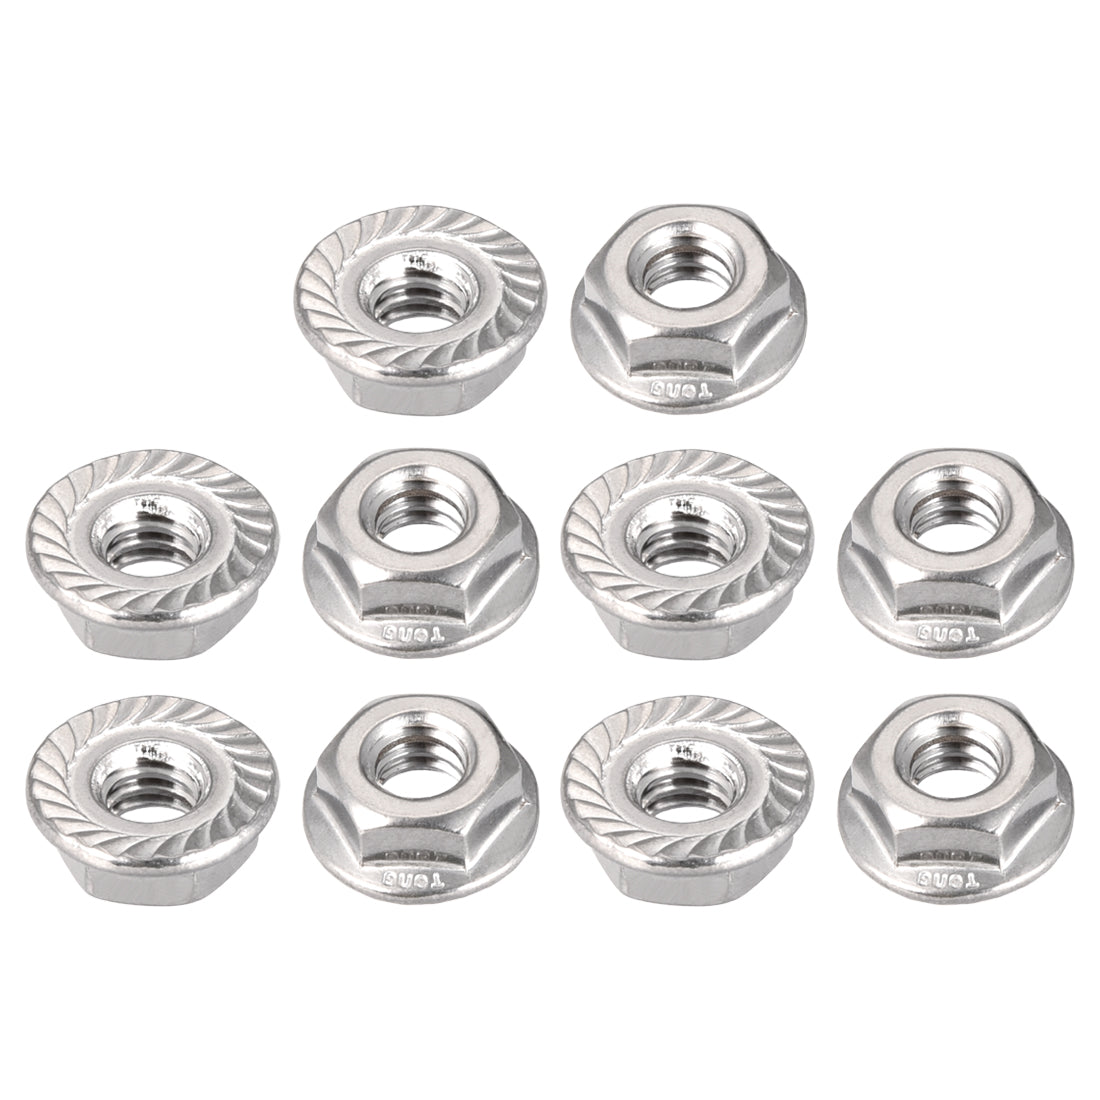 Uxcell Uxcell 1/4-20 Serrated Flange Hex Lock Nuts, 304 Stainless Steel, 10 Pcs